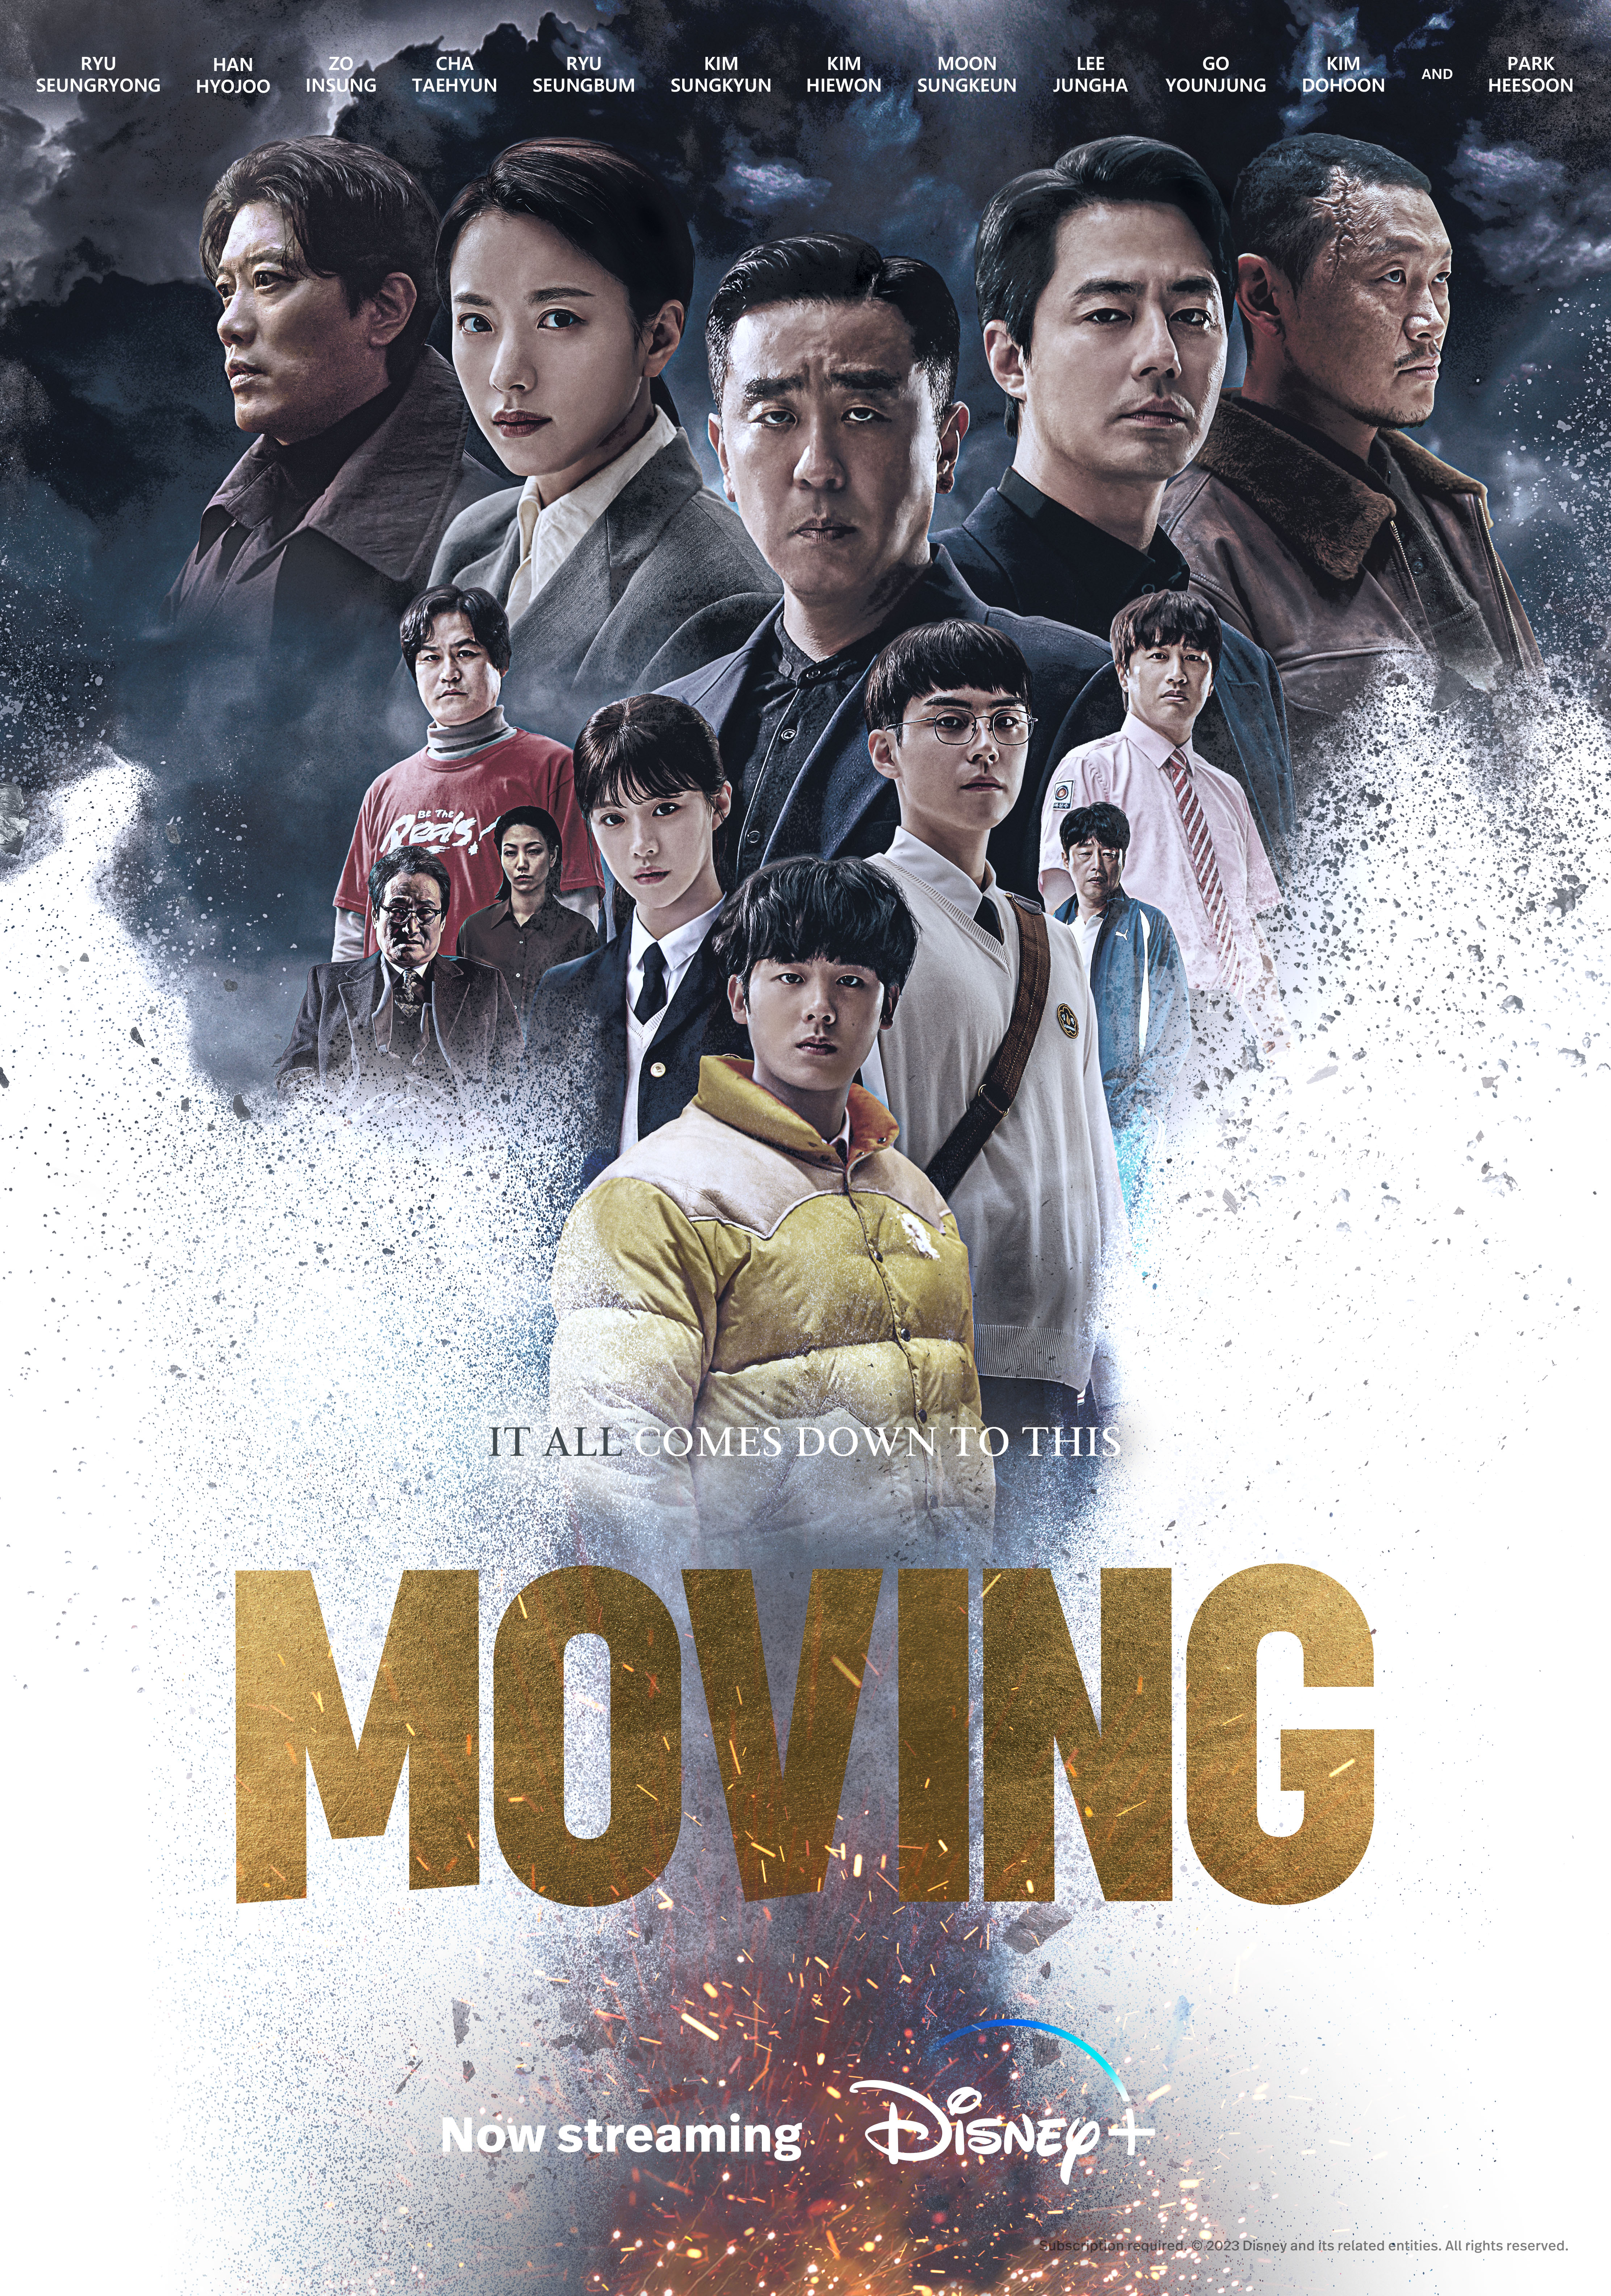 Disney+ Series "MOVING" and "THE WORST OF EVIL" Win Big in the 60th Baeksang Arts Awards